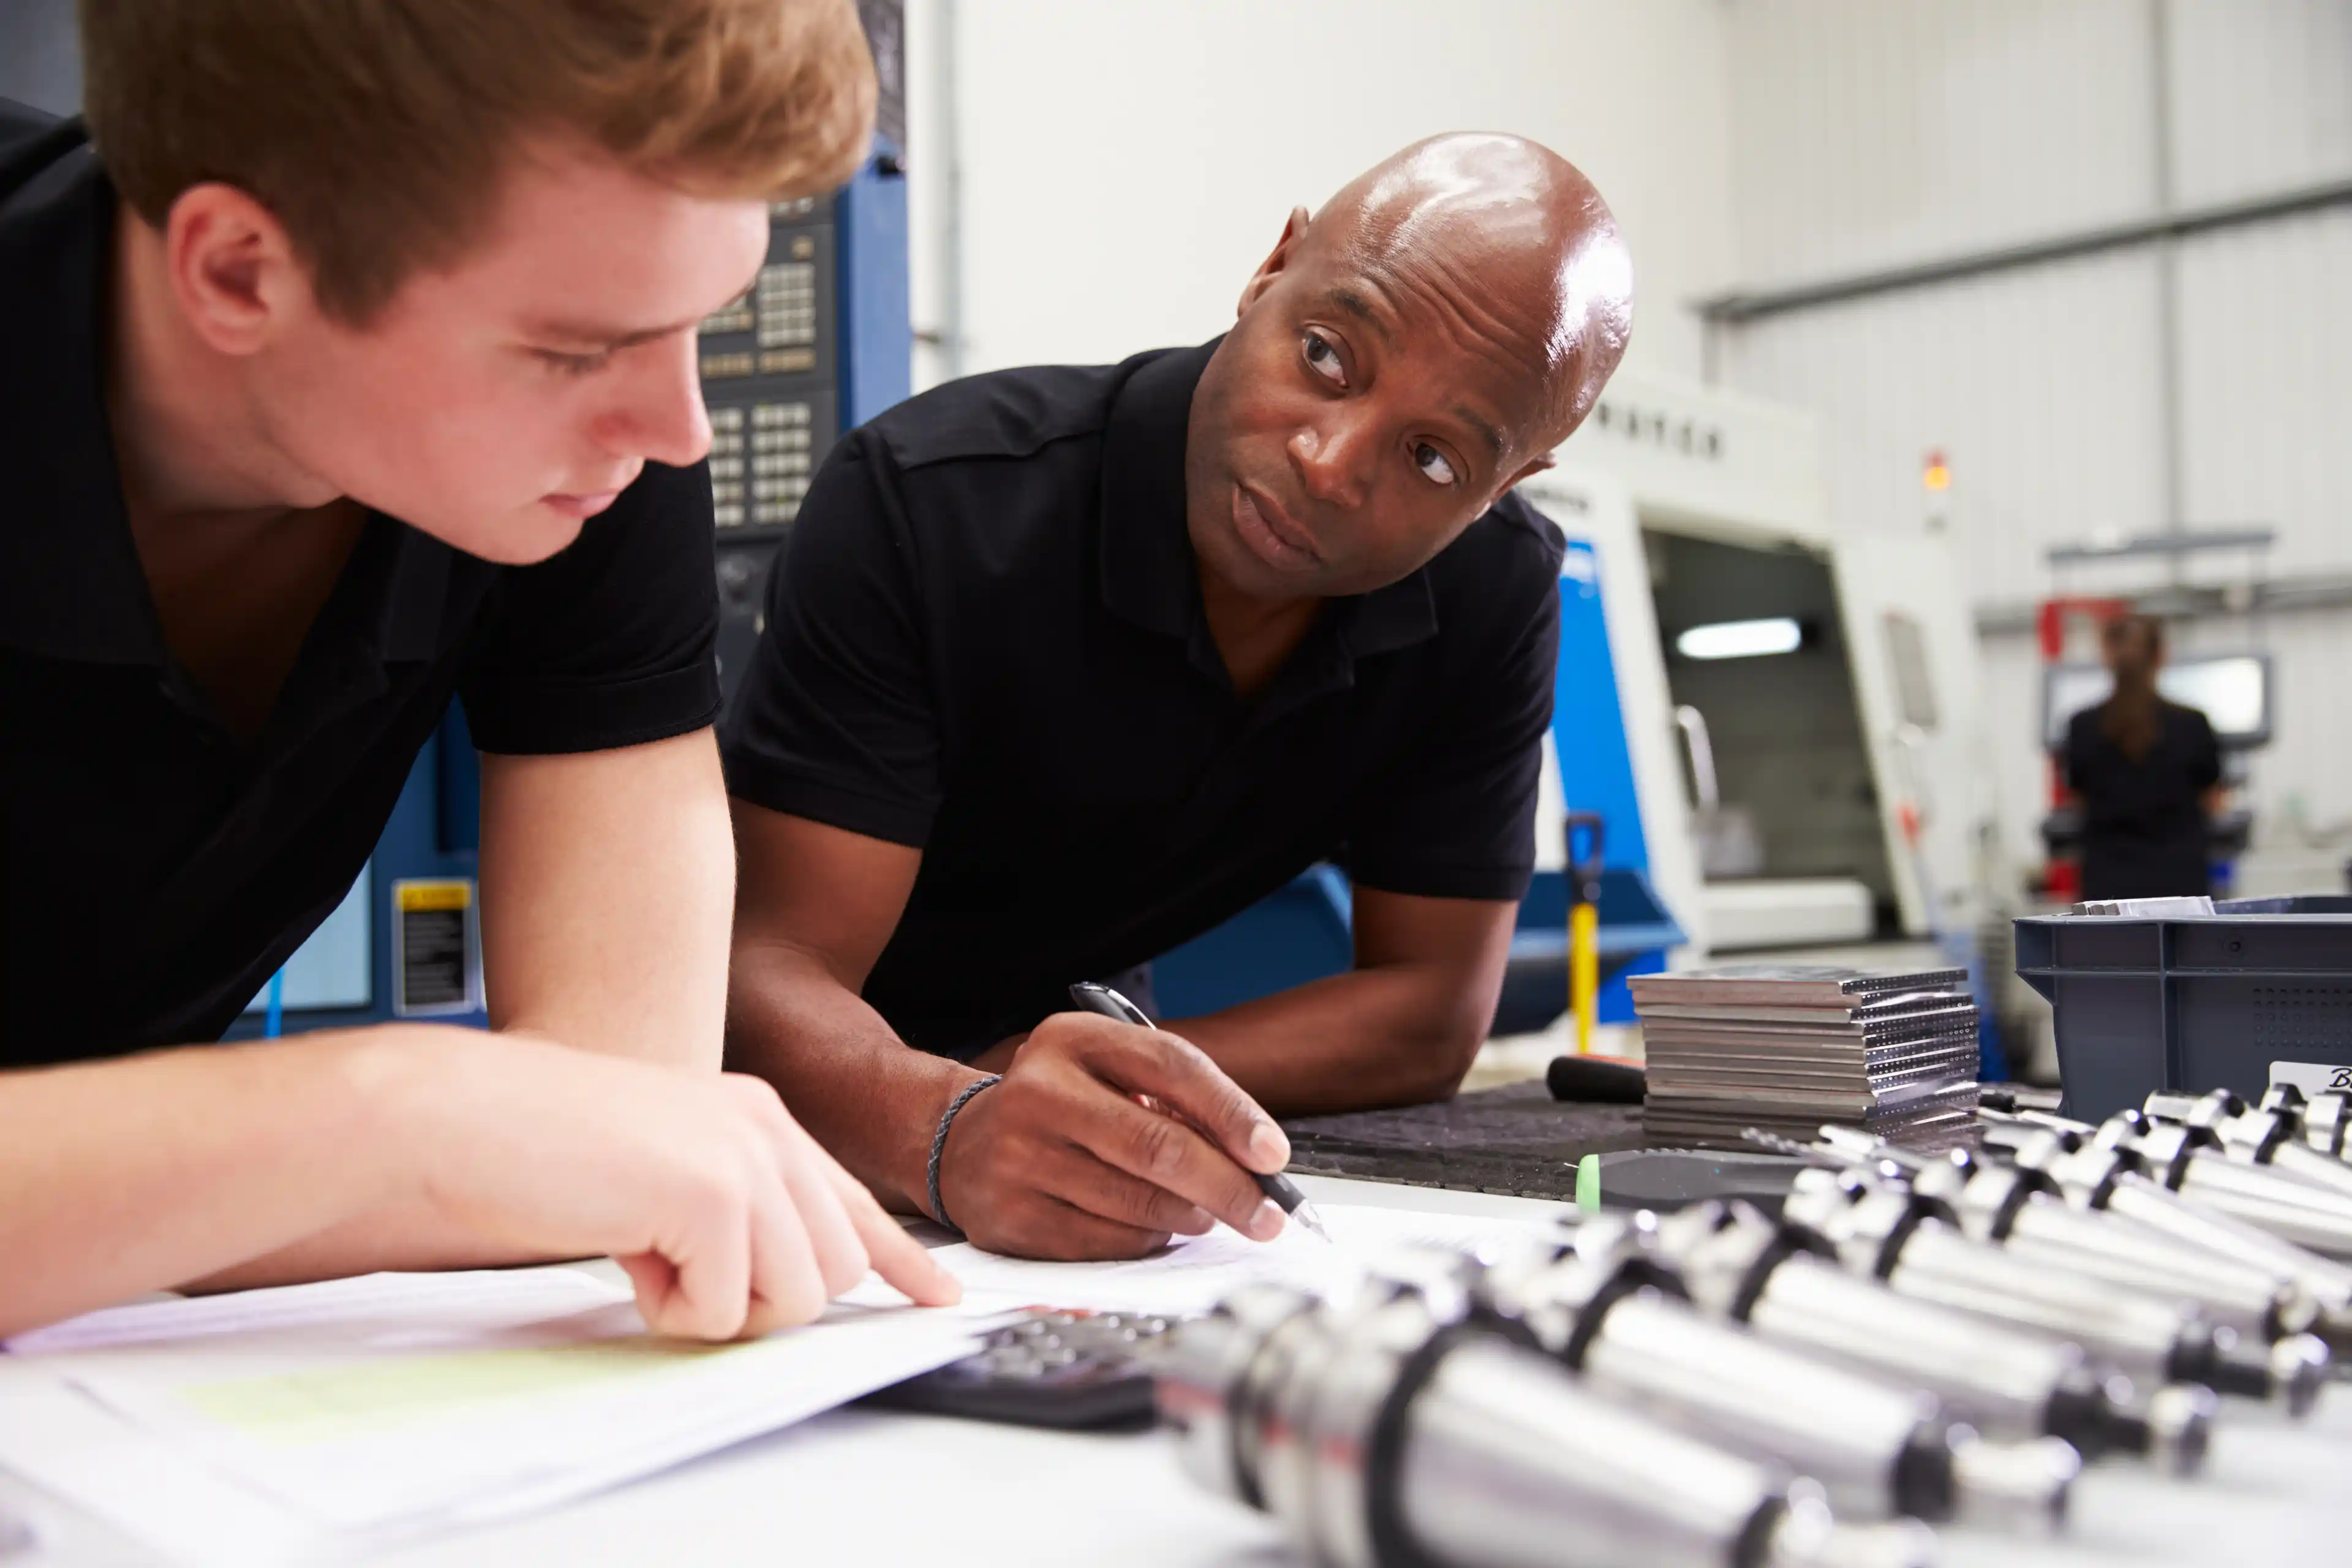 Teaching a manufacturing qualification